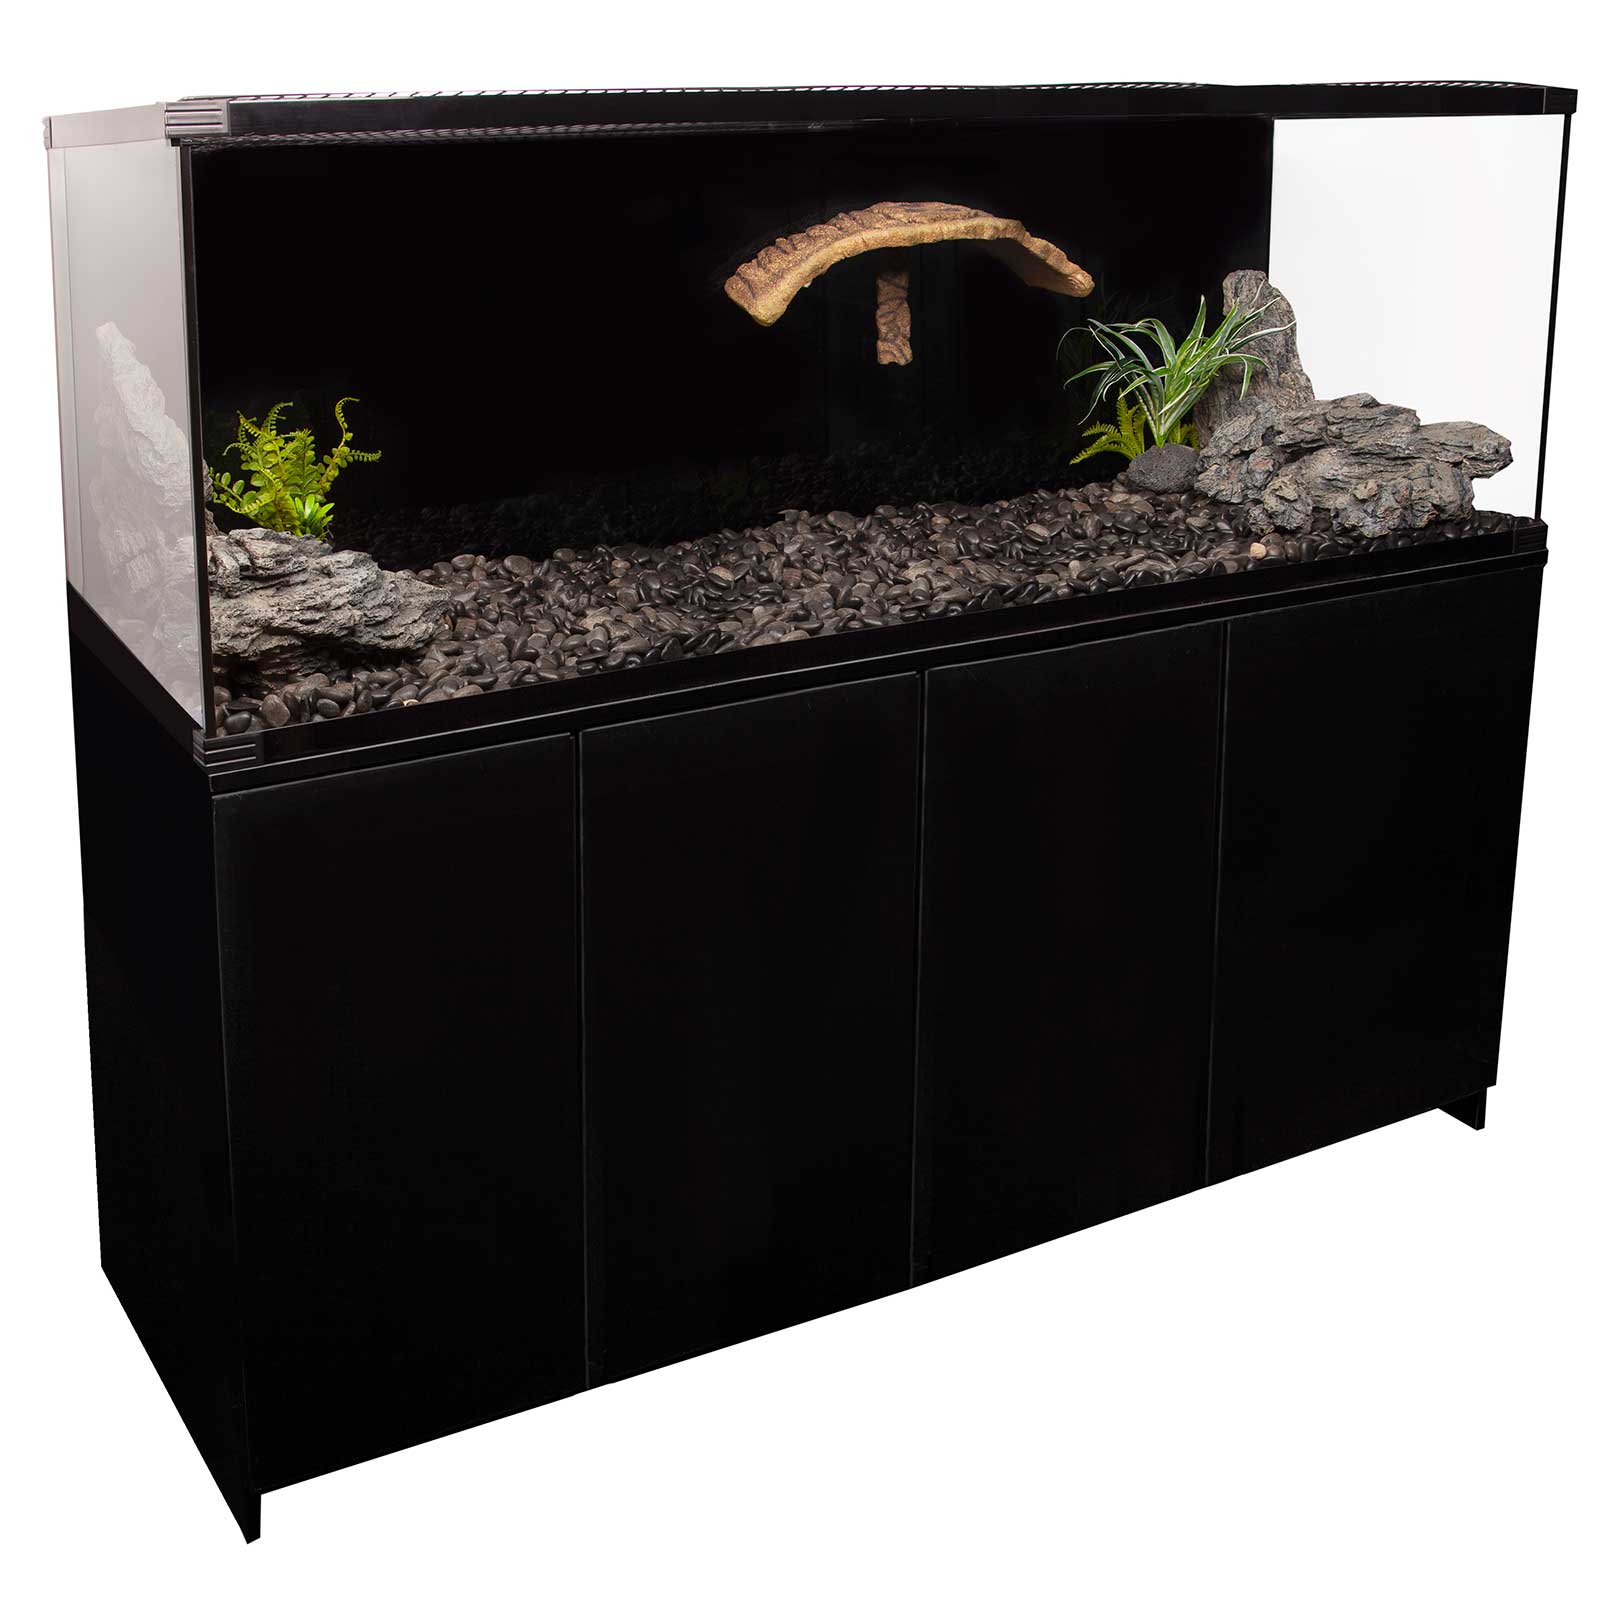 Reptile One Eco180 Turtle Tank and Cabinet